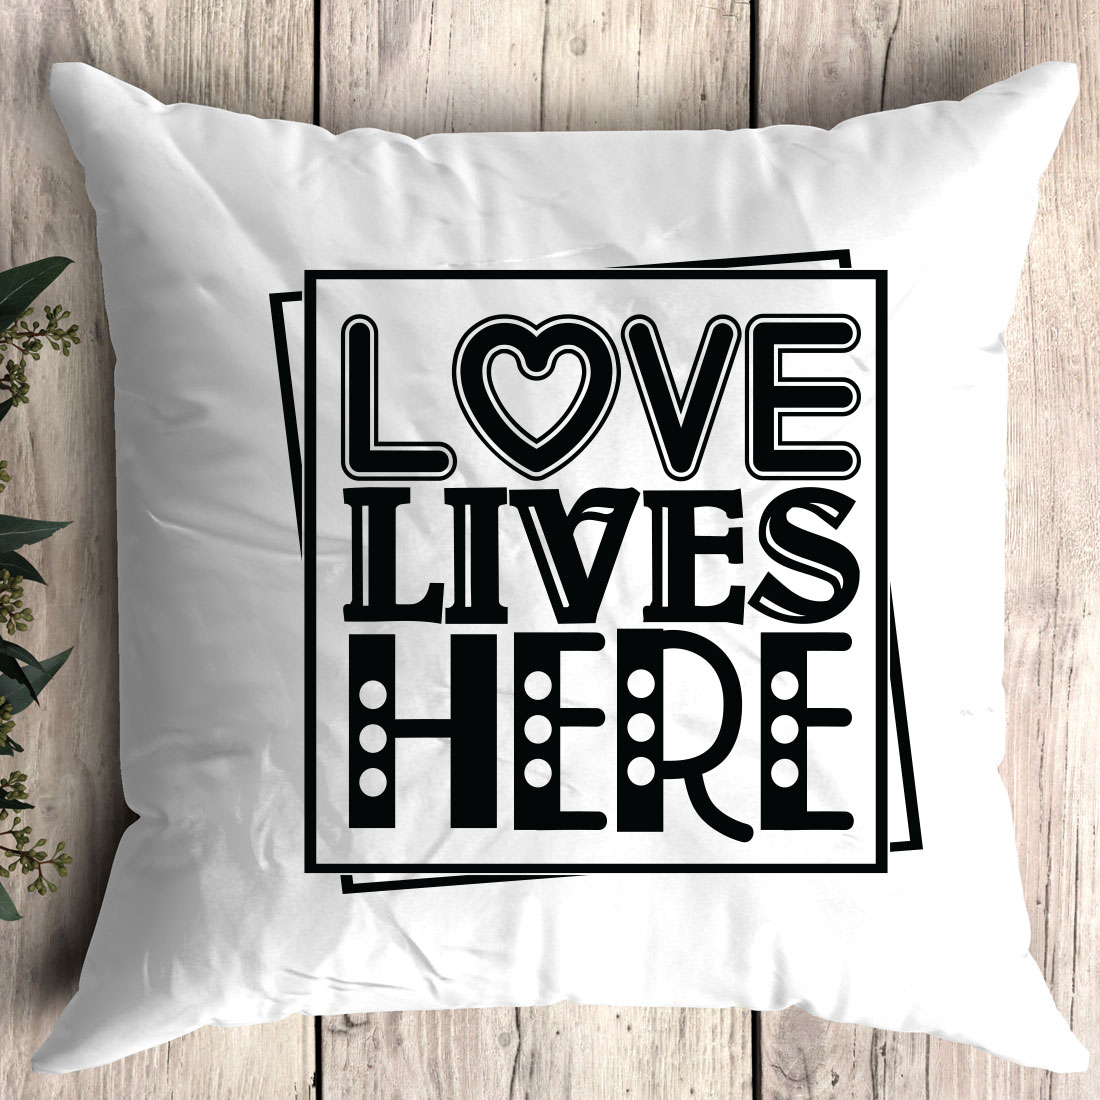 White pillow with the words love lives here on it.